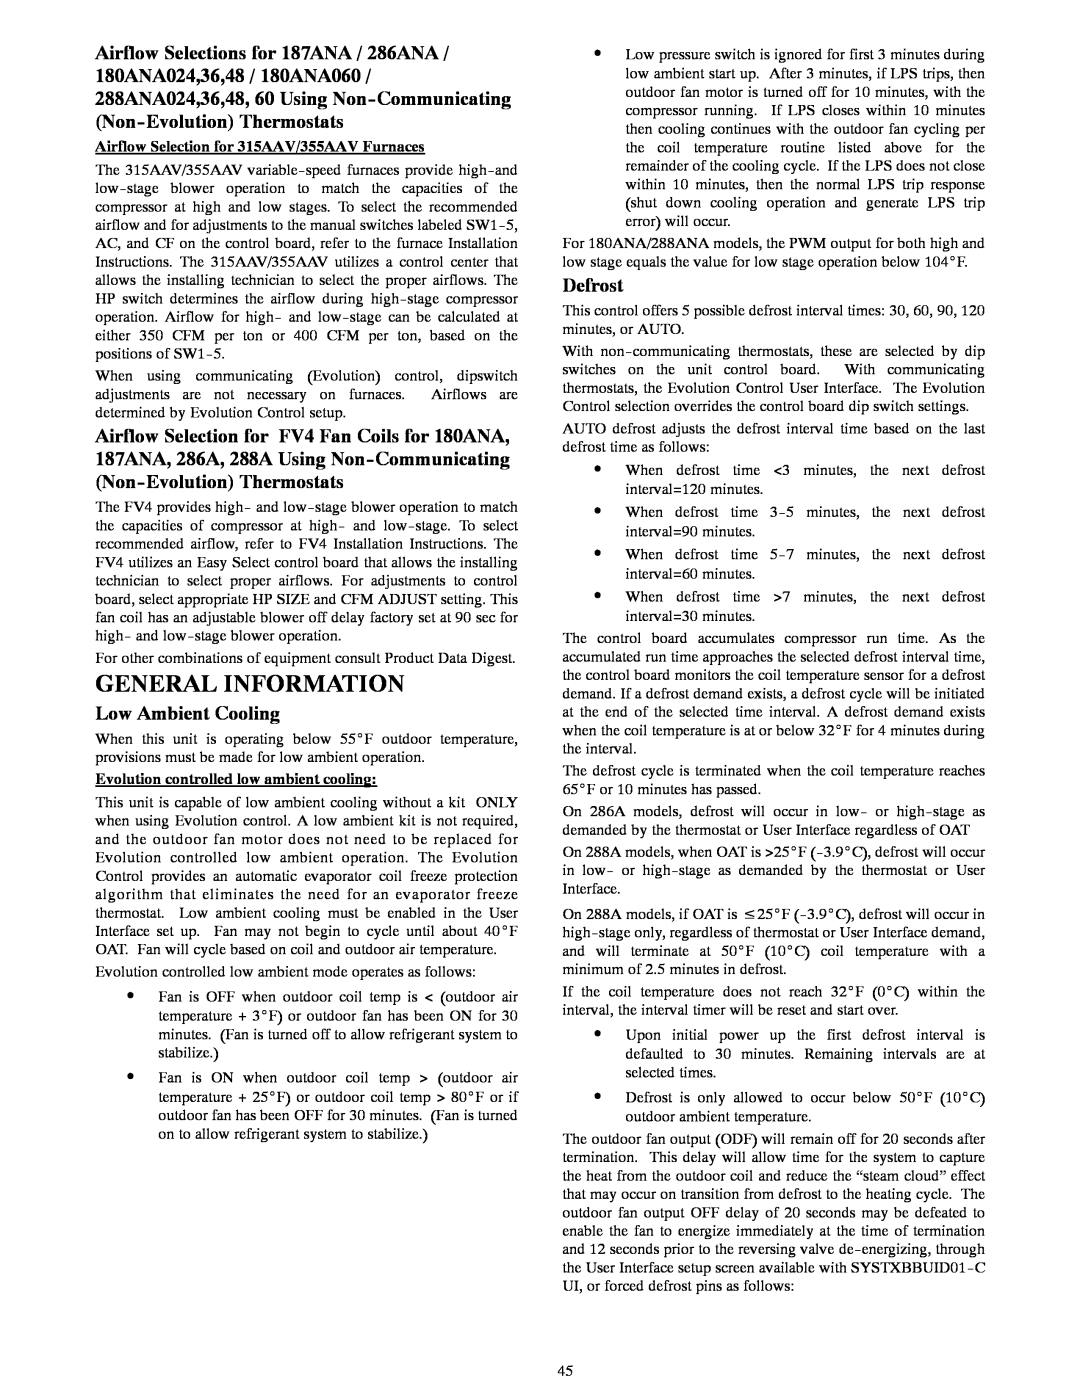 Bryant R-22 service manual General Information, Low Ambient Cooling, Defrost 